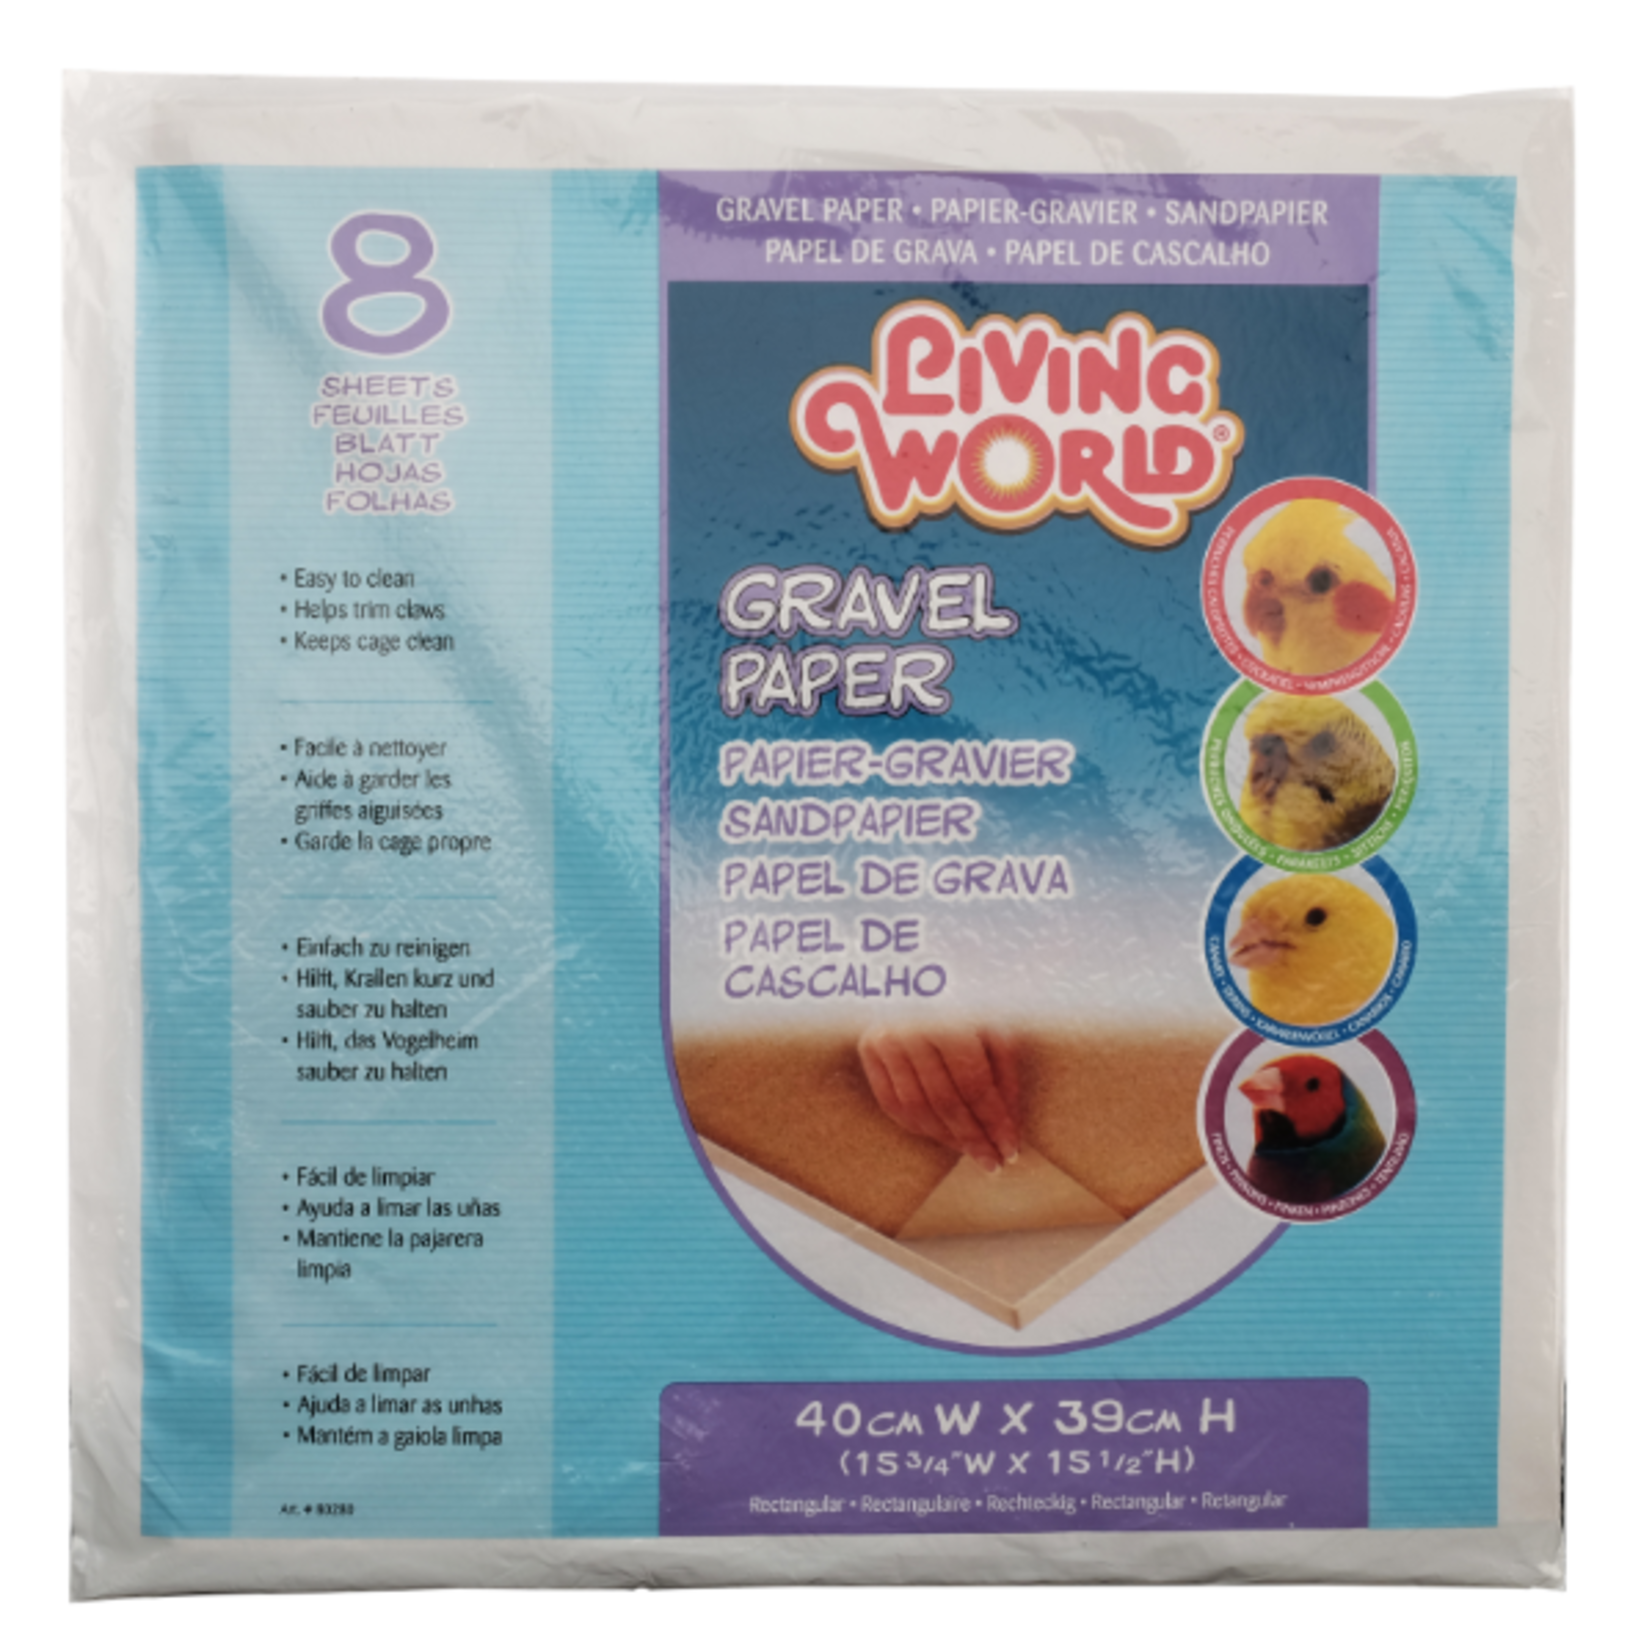 Living World Gravel Paper - Large - Pack of 8 - 15.75 x 15.5 in